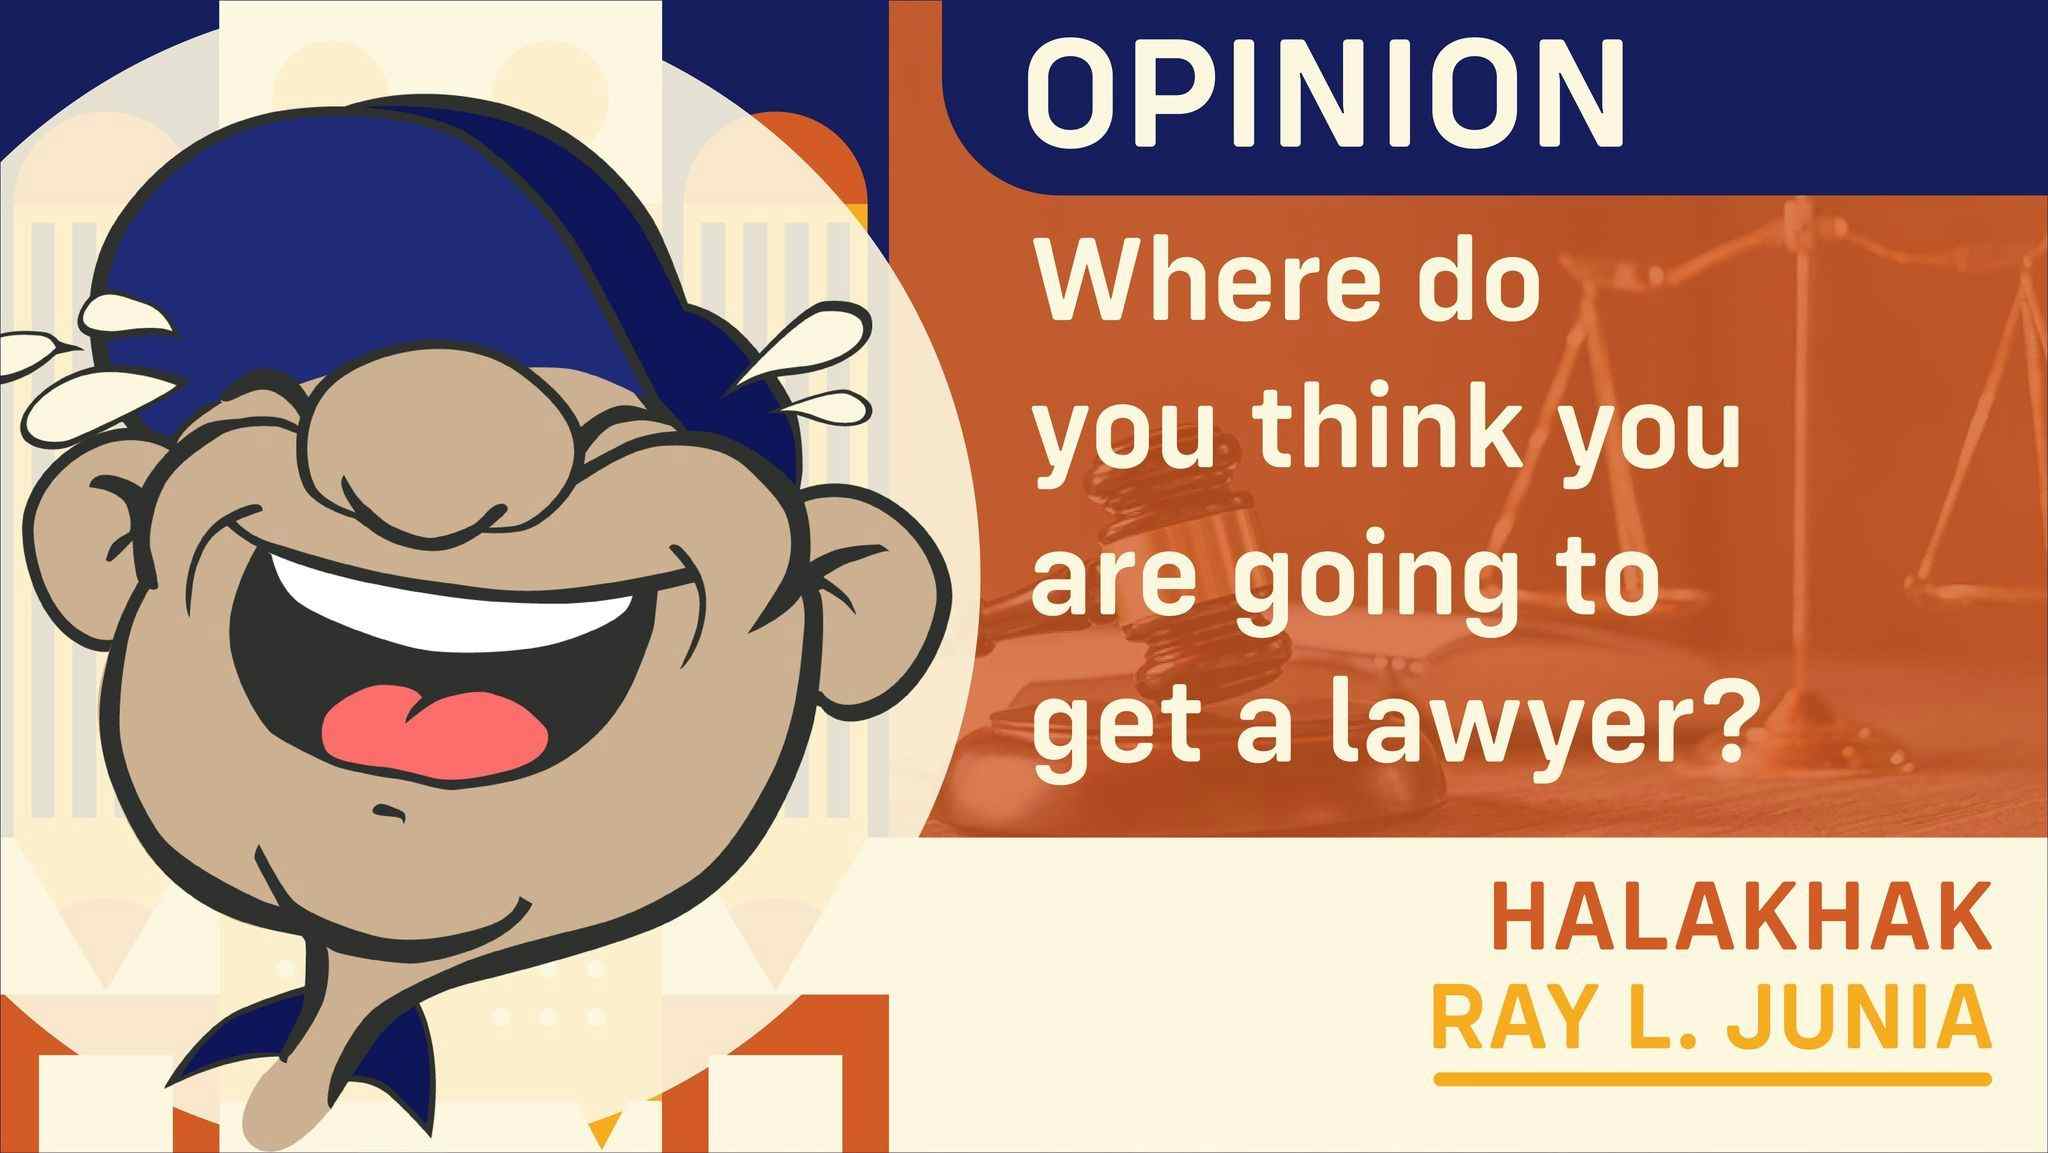 Where do you think you are going to get a lawyer?